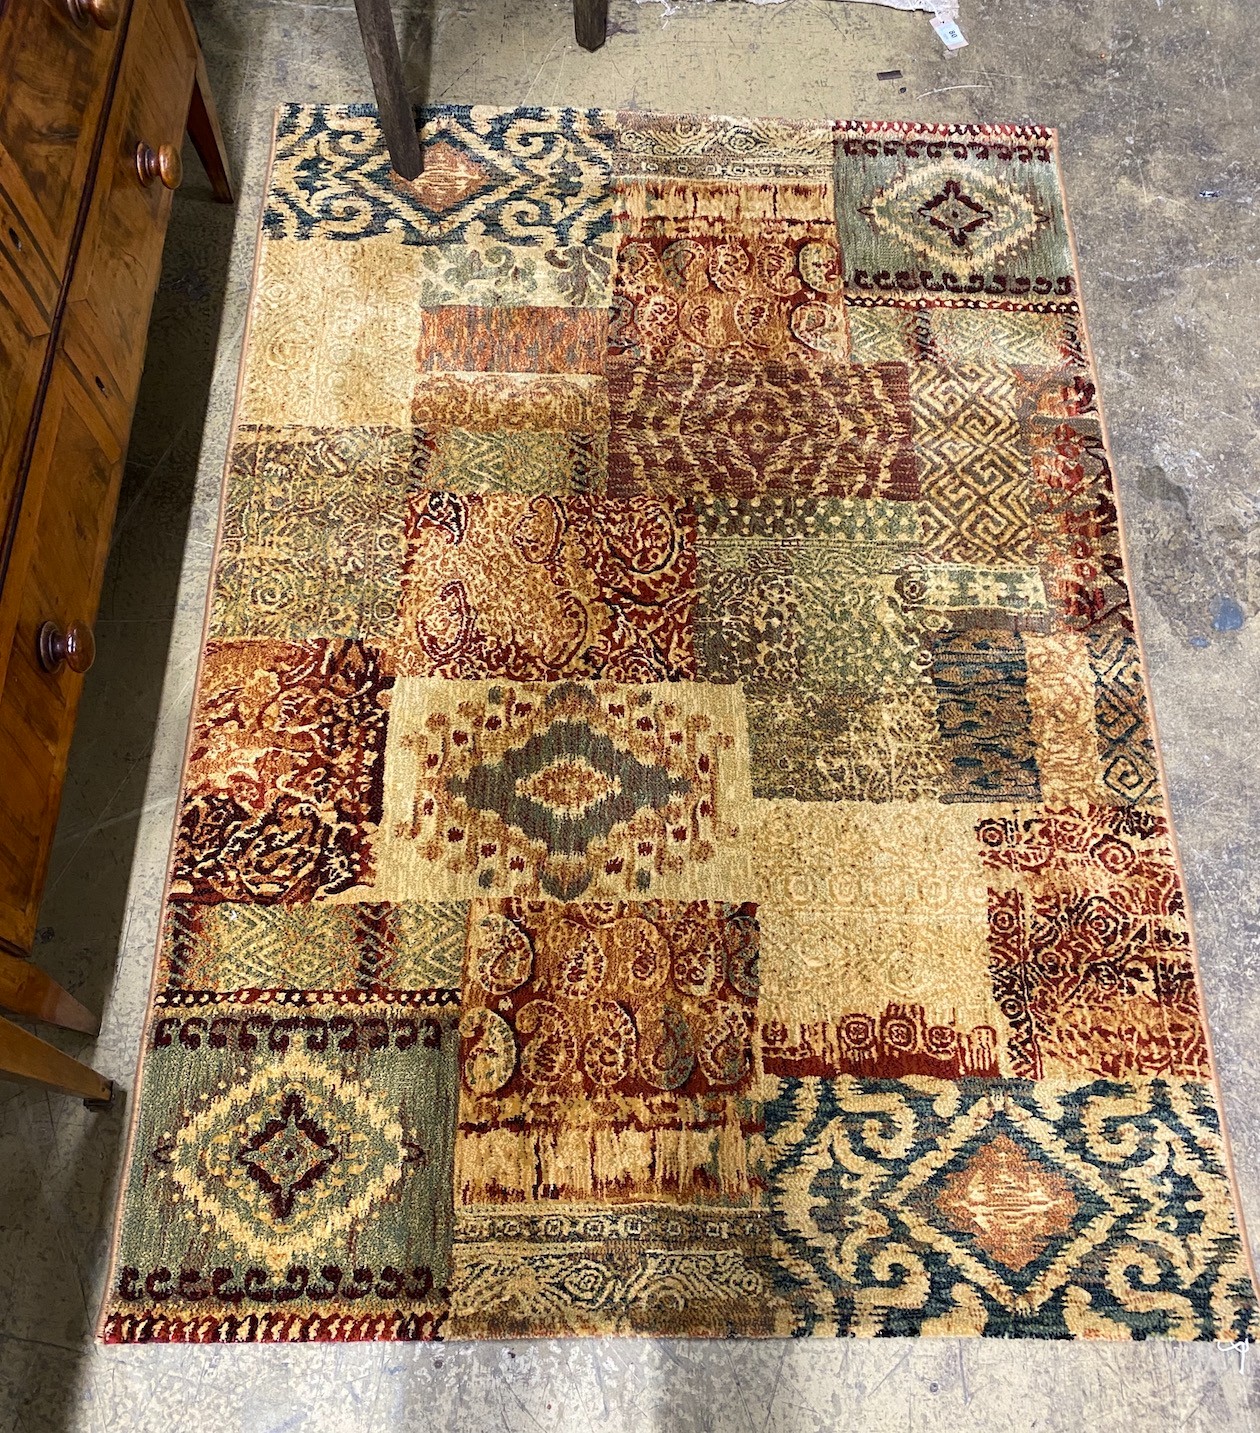 A contemporary patterned rug, 170 x 120cm